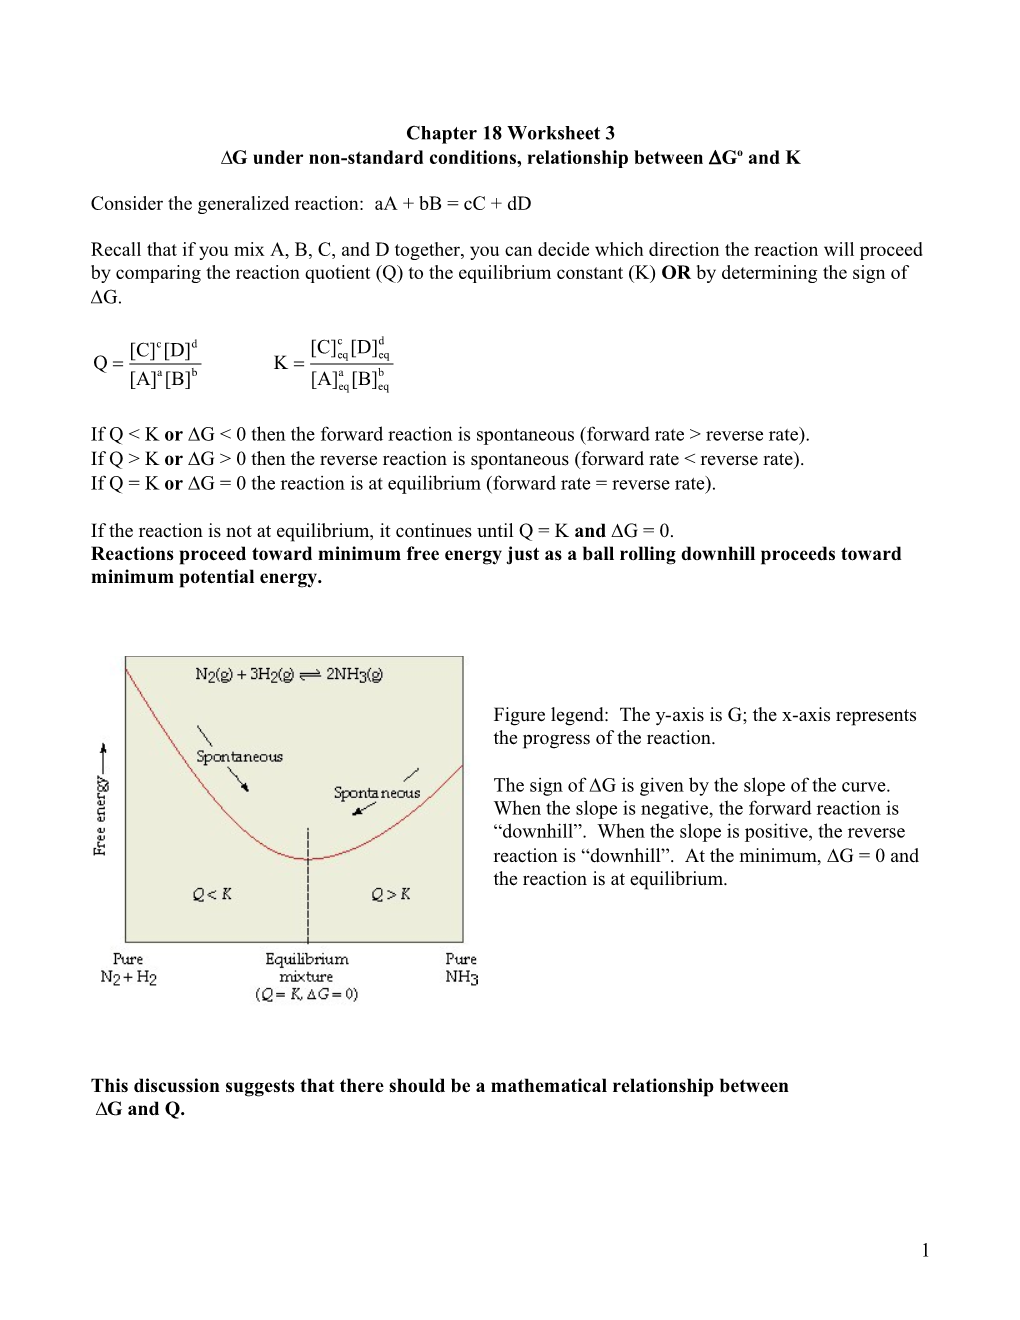 Consider the Generalized Reaction: Aa + Bb = Cc + Dd